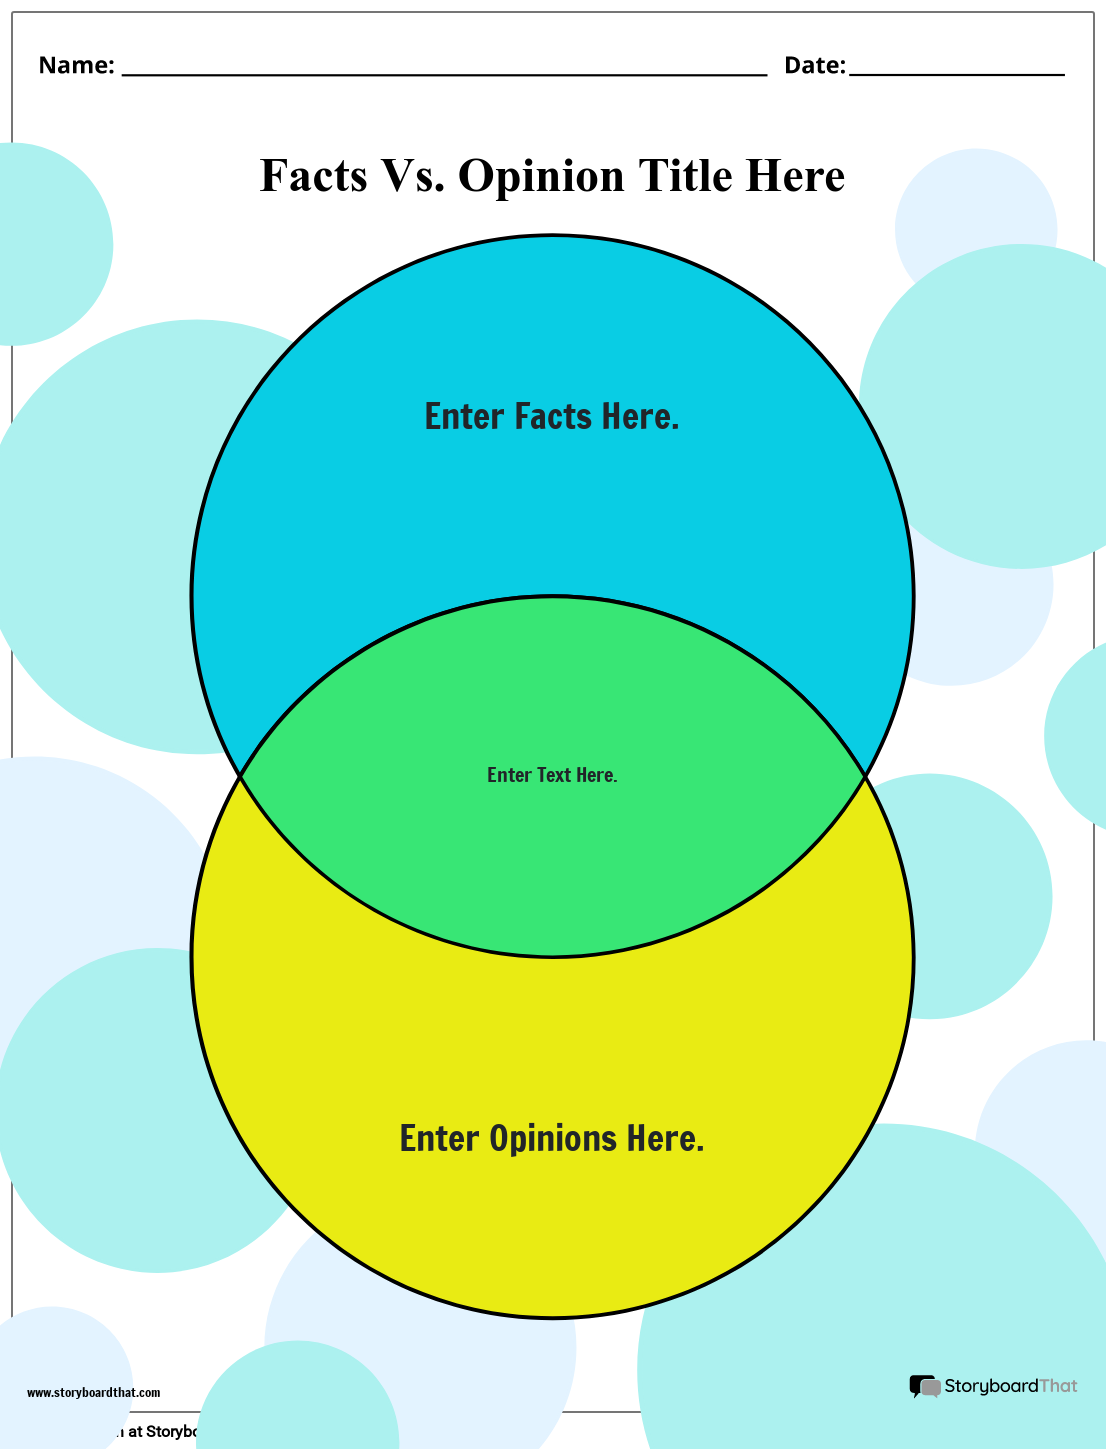 New Create Page Fact vs. Opinion Template 2